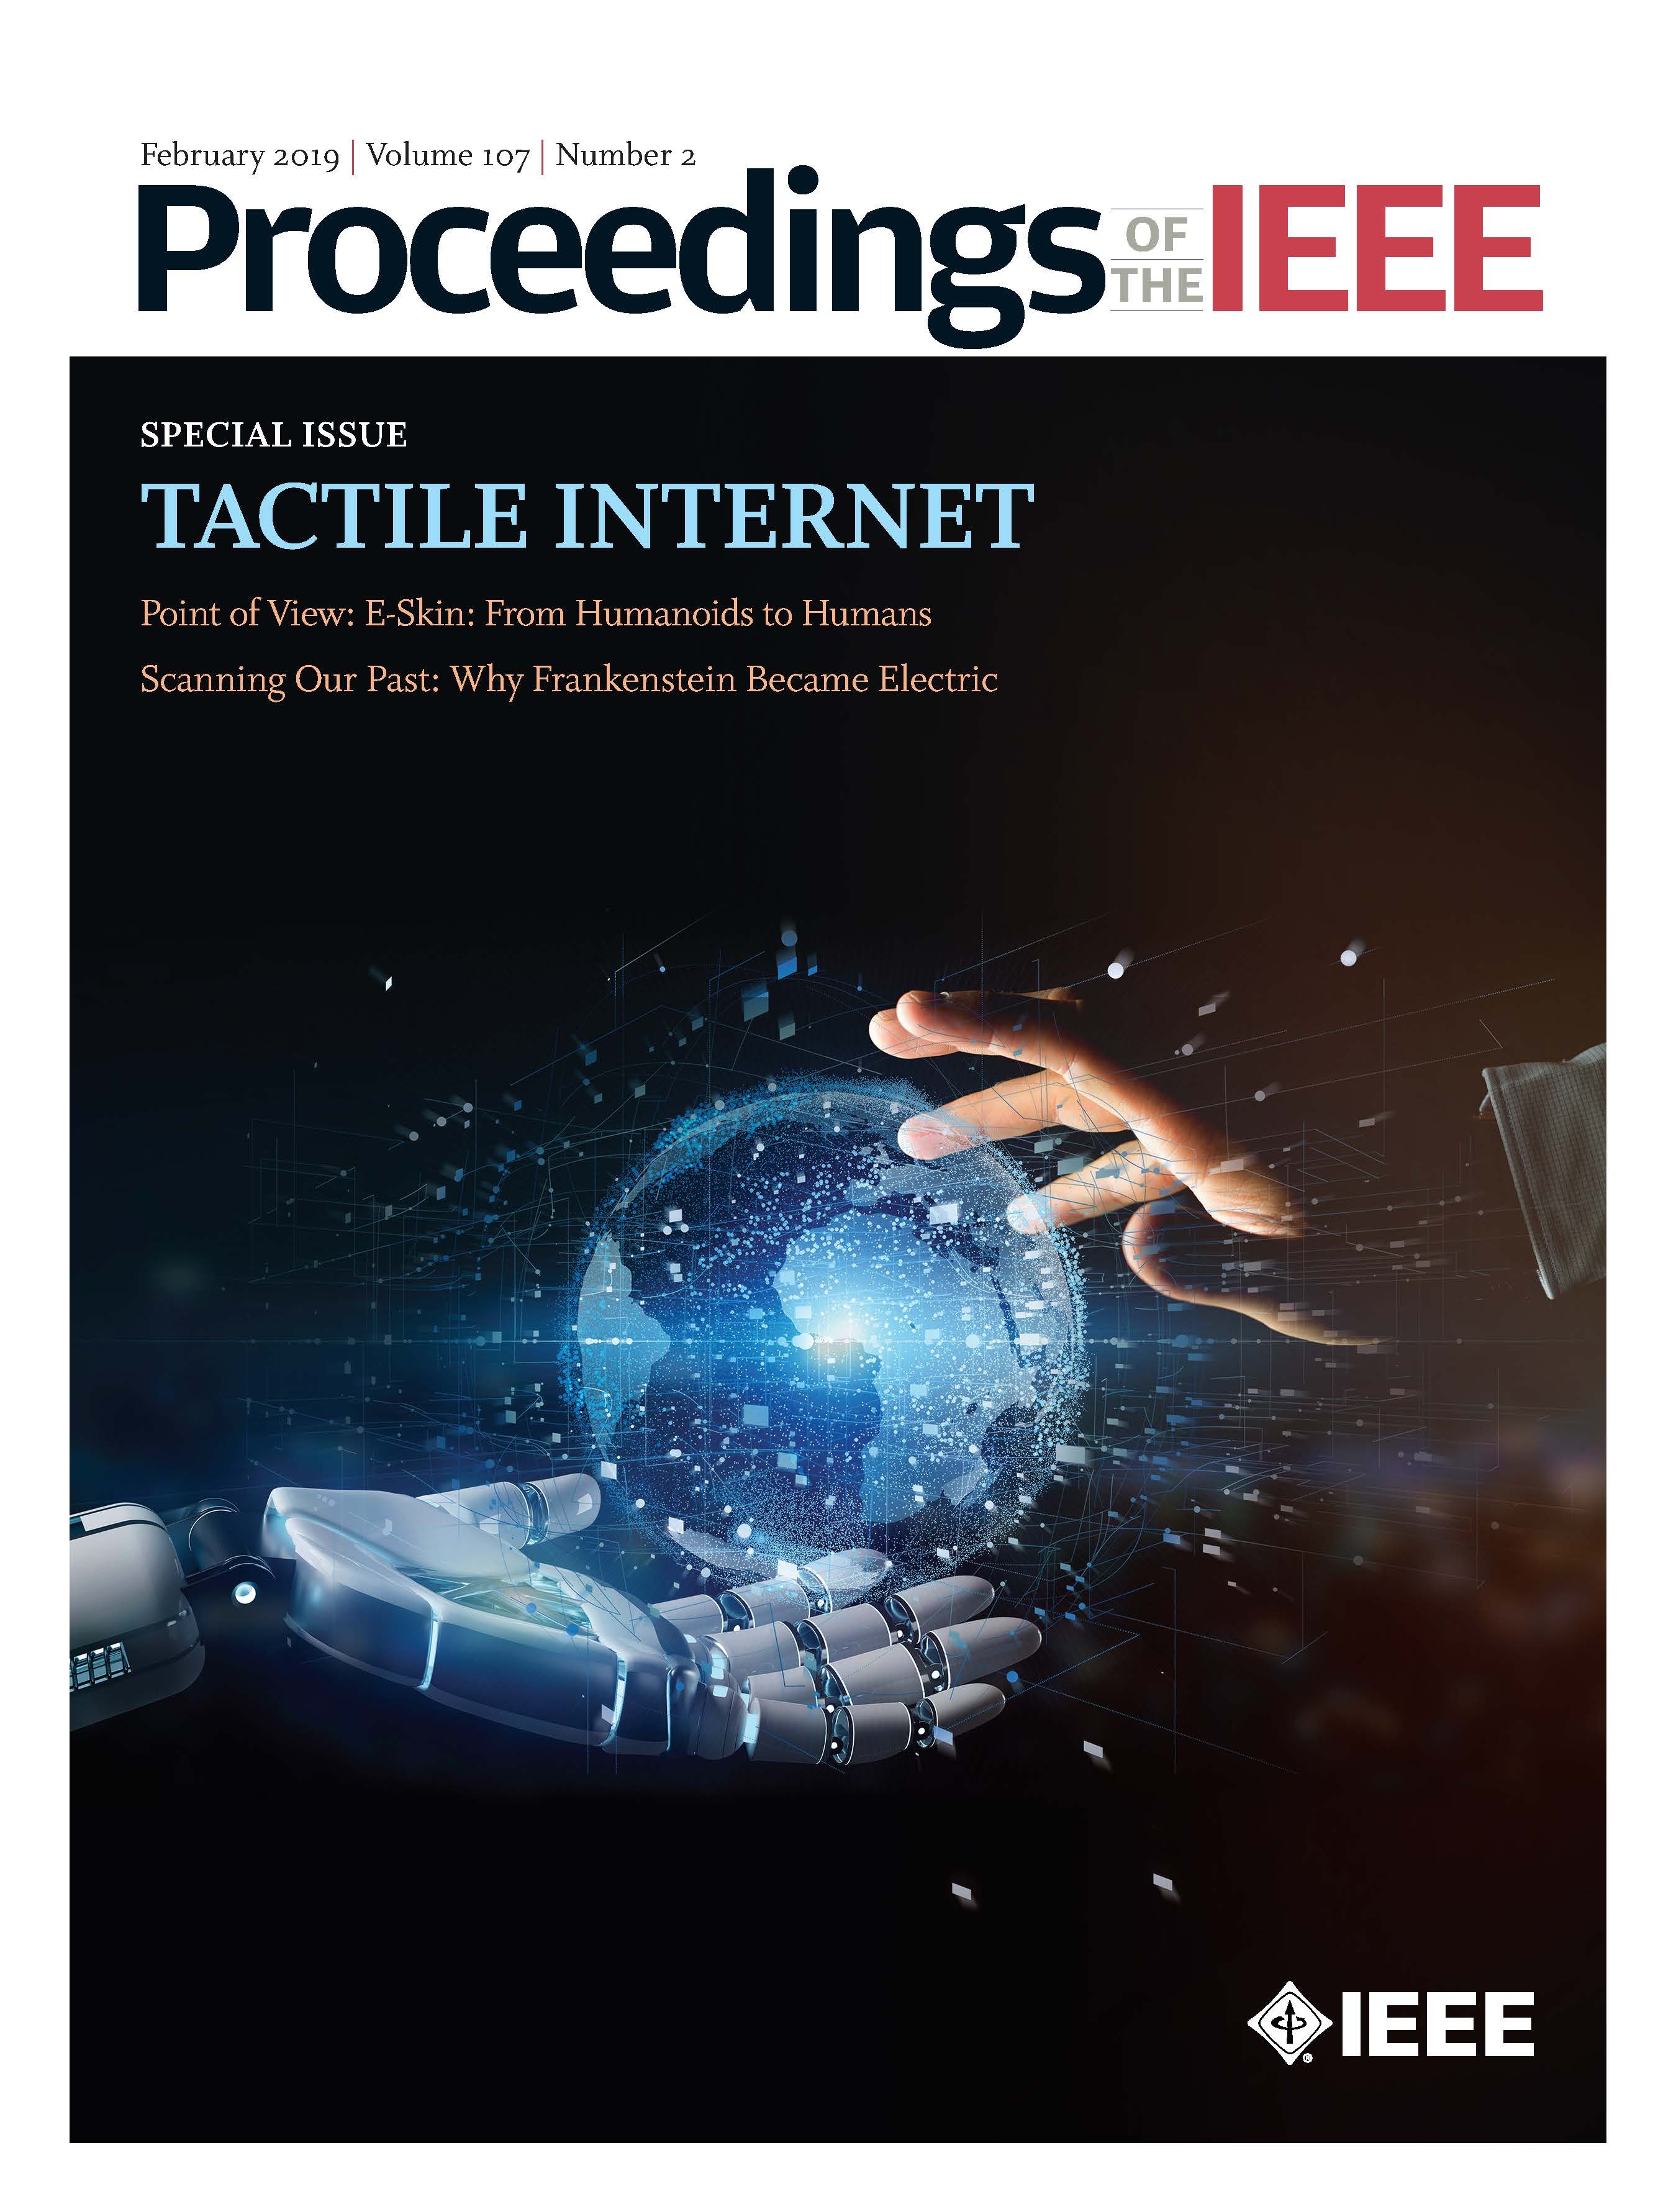 Proceedings of the IEEE February 2019 Vol. 107 No. 2